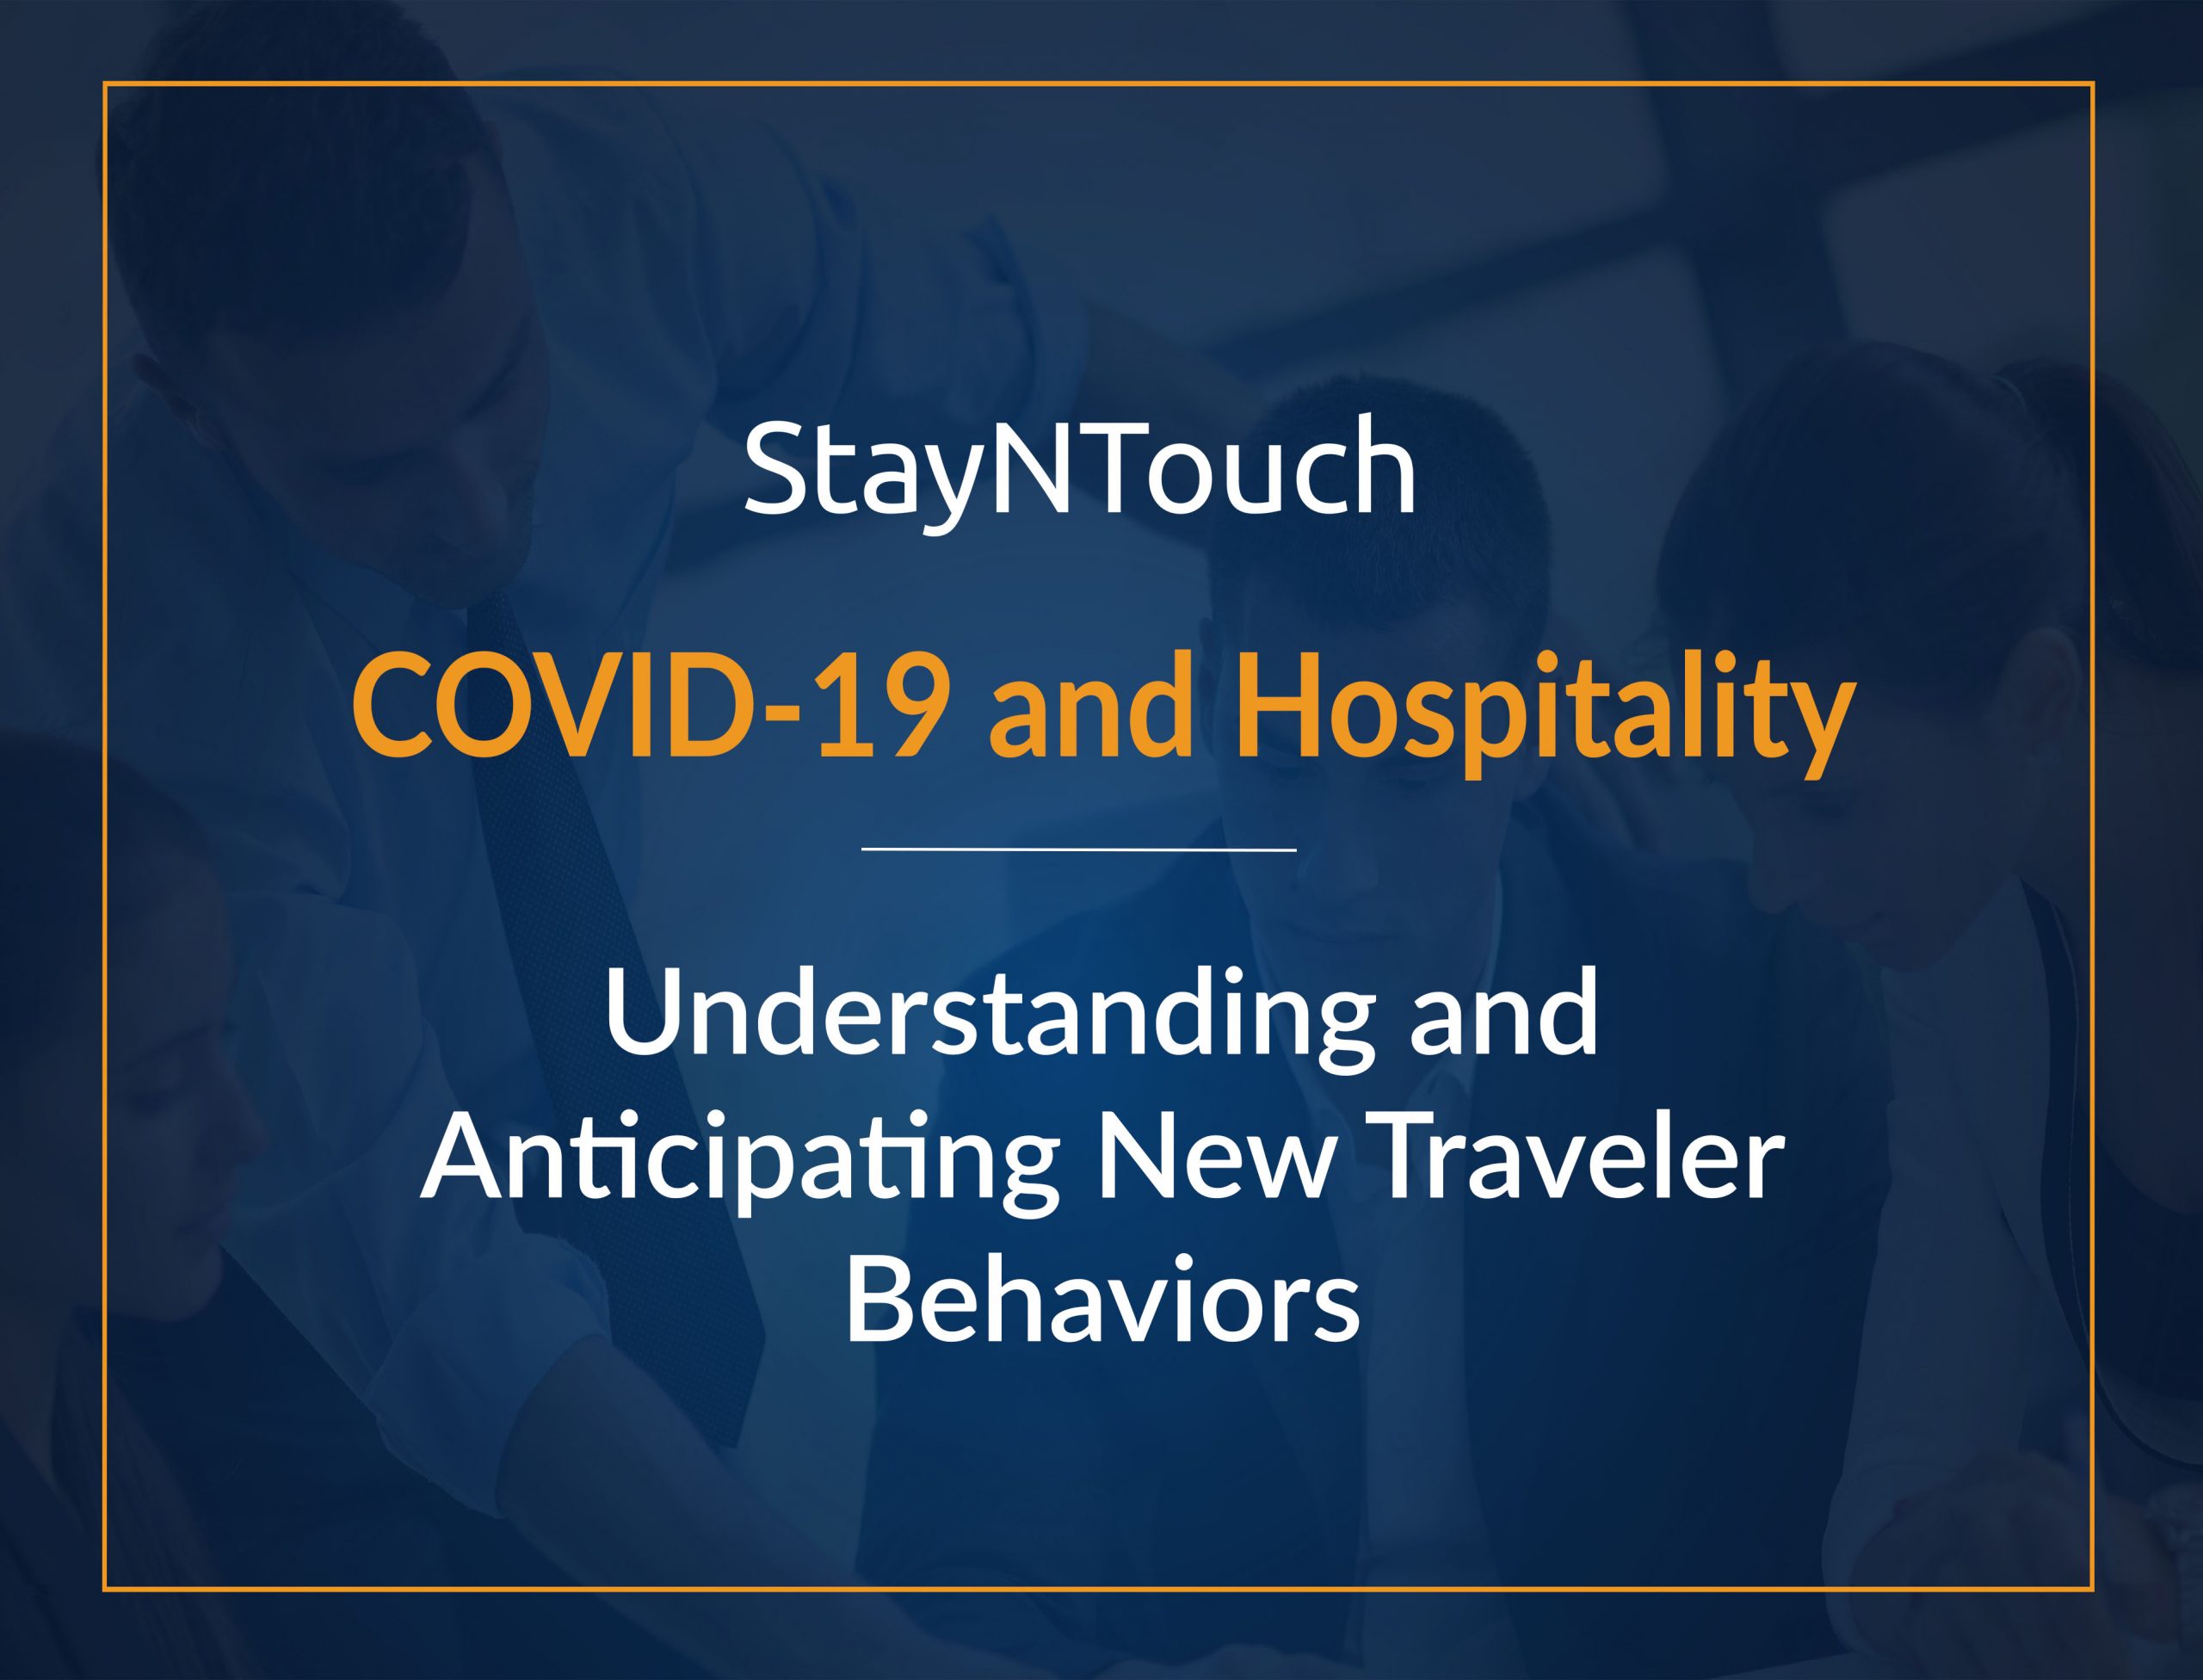 COVID-19 and Hospitality: Understanding and Anticipating New Traveler Behaviors